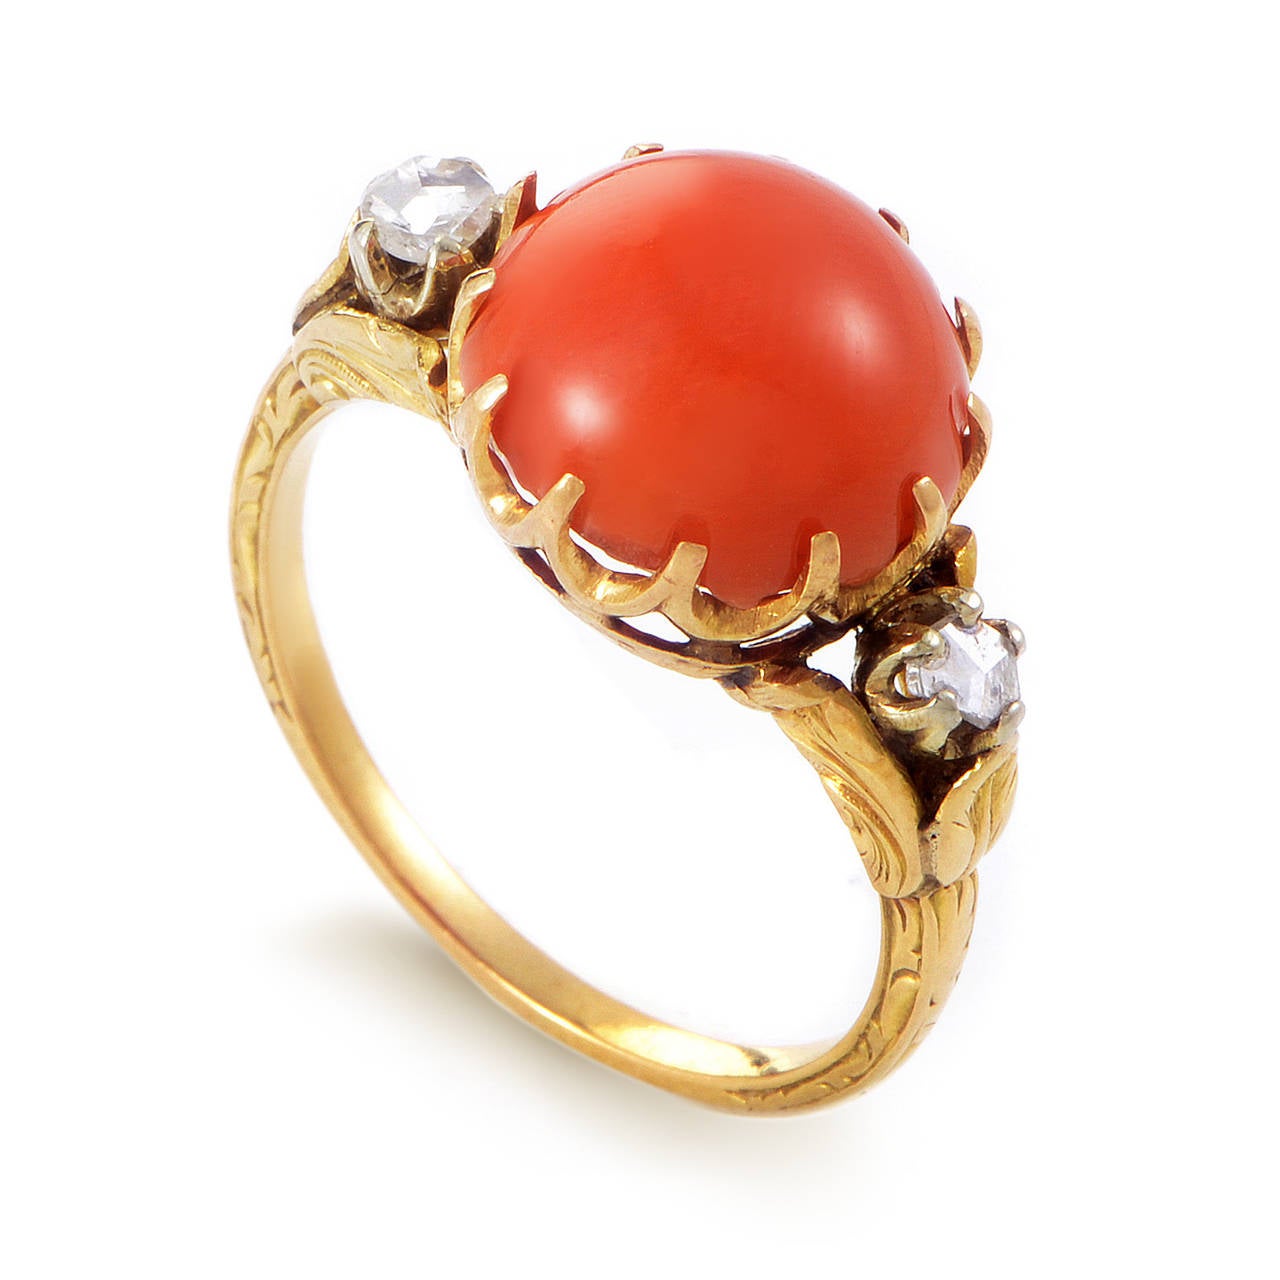 This set is absolutely stunning and contains two intricately designed pieces. A ring and earring set made of both 18K yellow gold and are set with coral cabochons. Lastly, diamonds add a touch of elegance to the overall design.

Weight: Earring